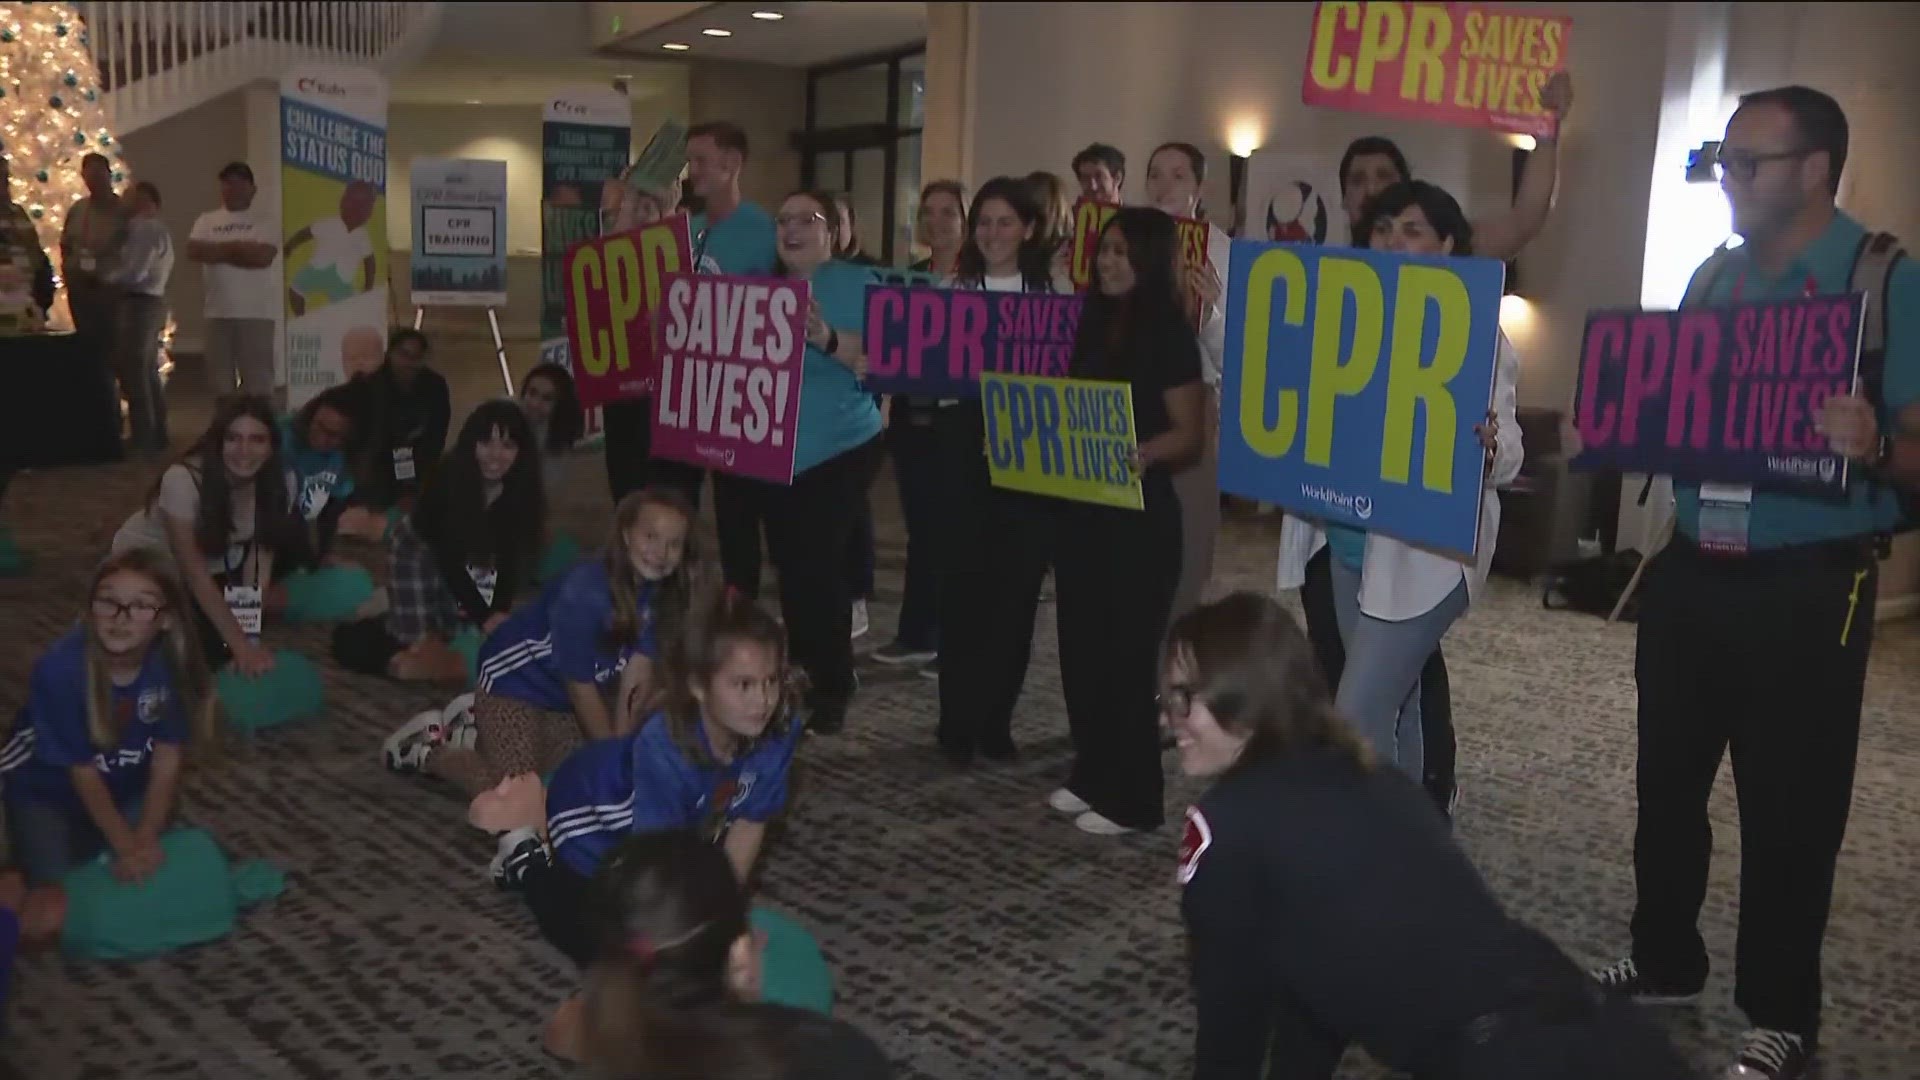 The Citizen CPR Foundation aims to educate first responders and the public on actions that can be taken to help save the lives of victims of sudden cardiac arrest.